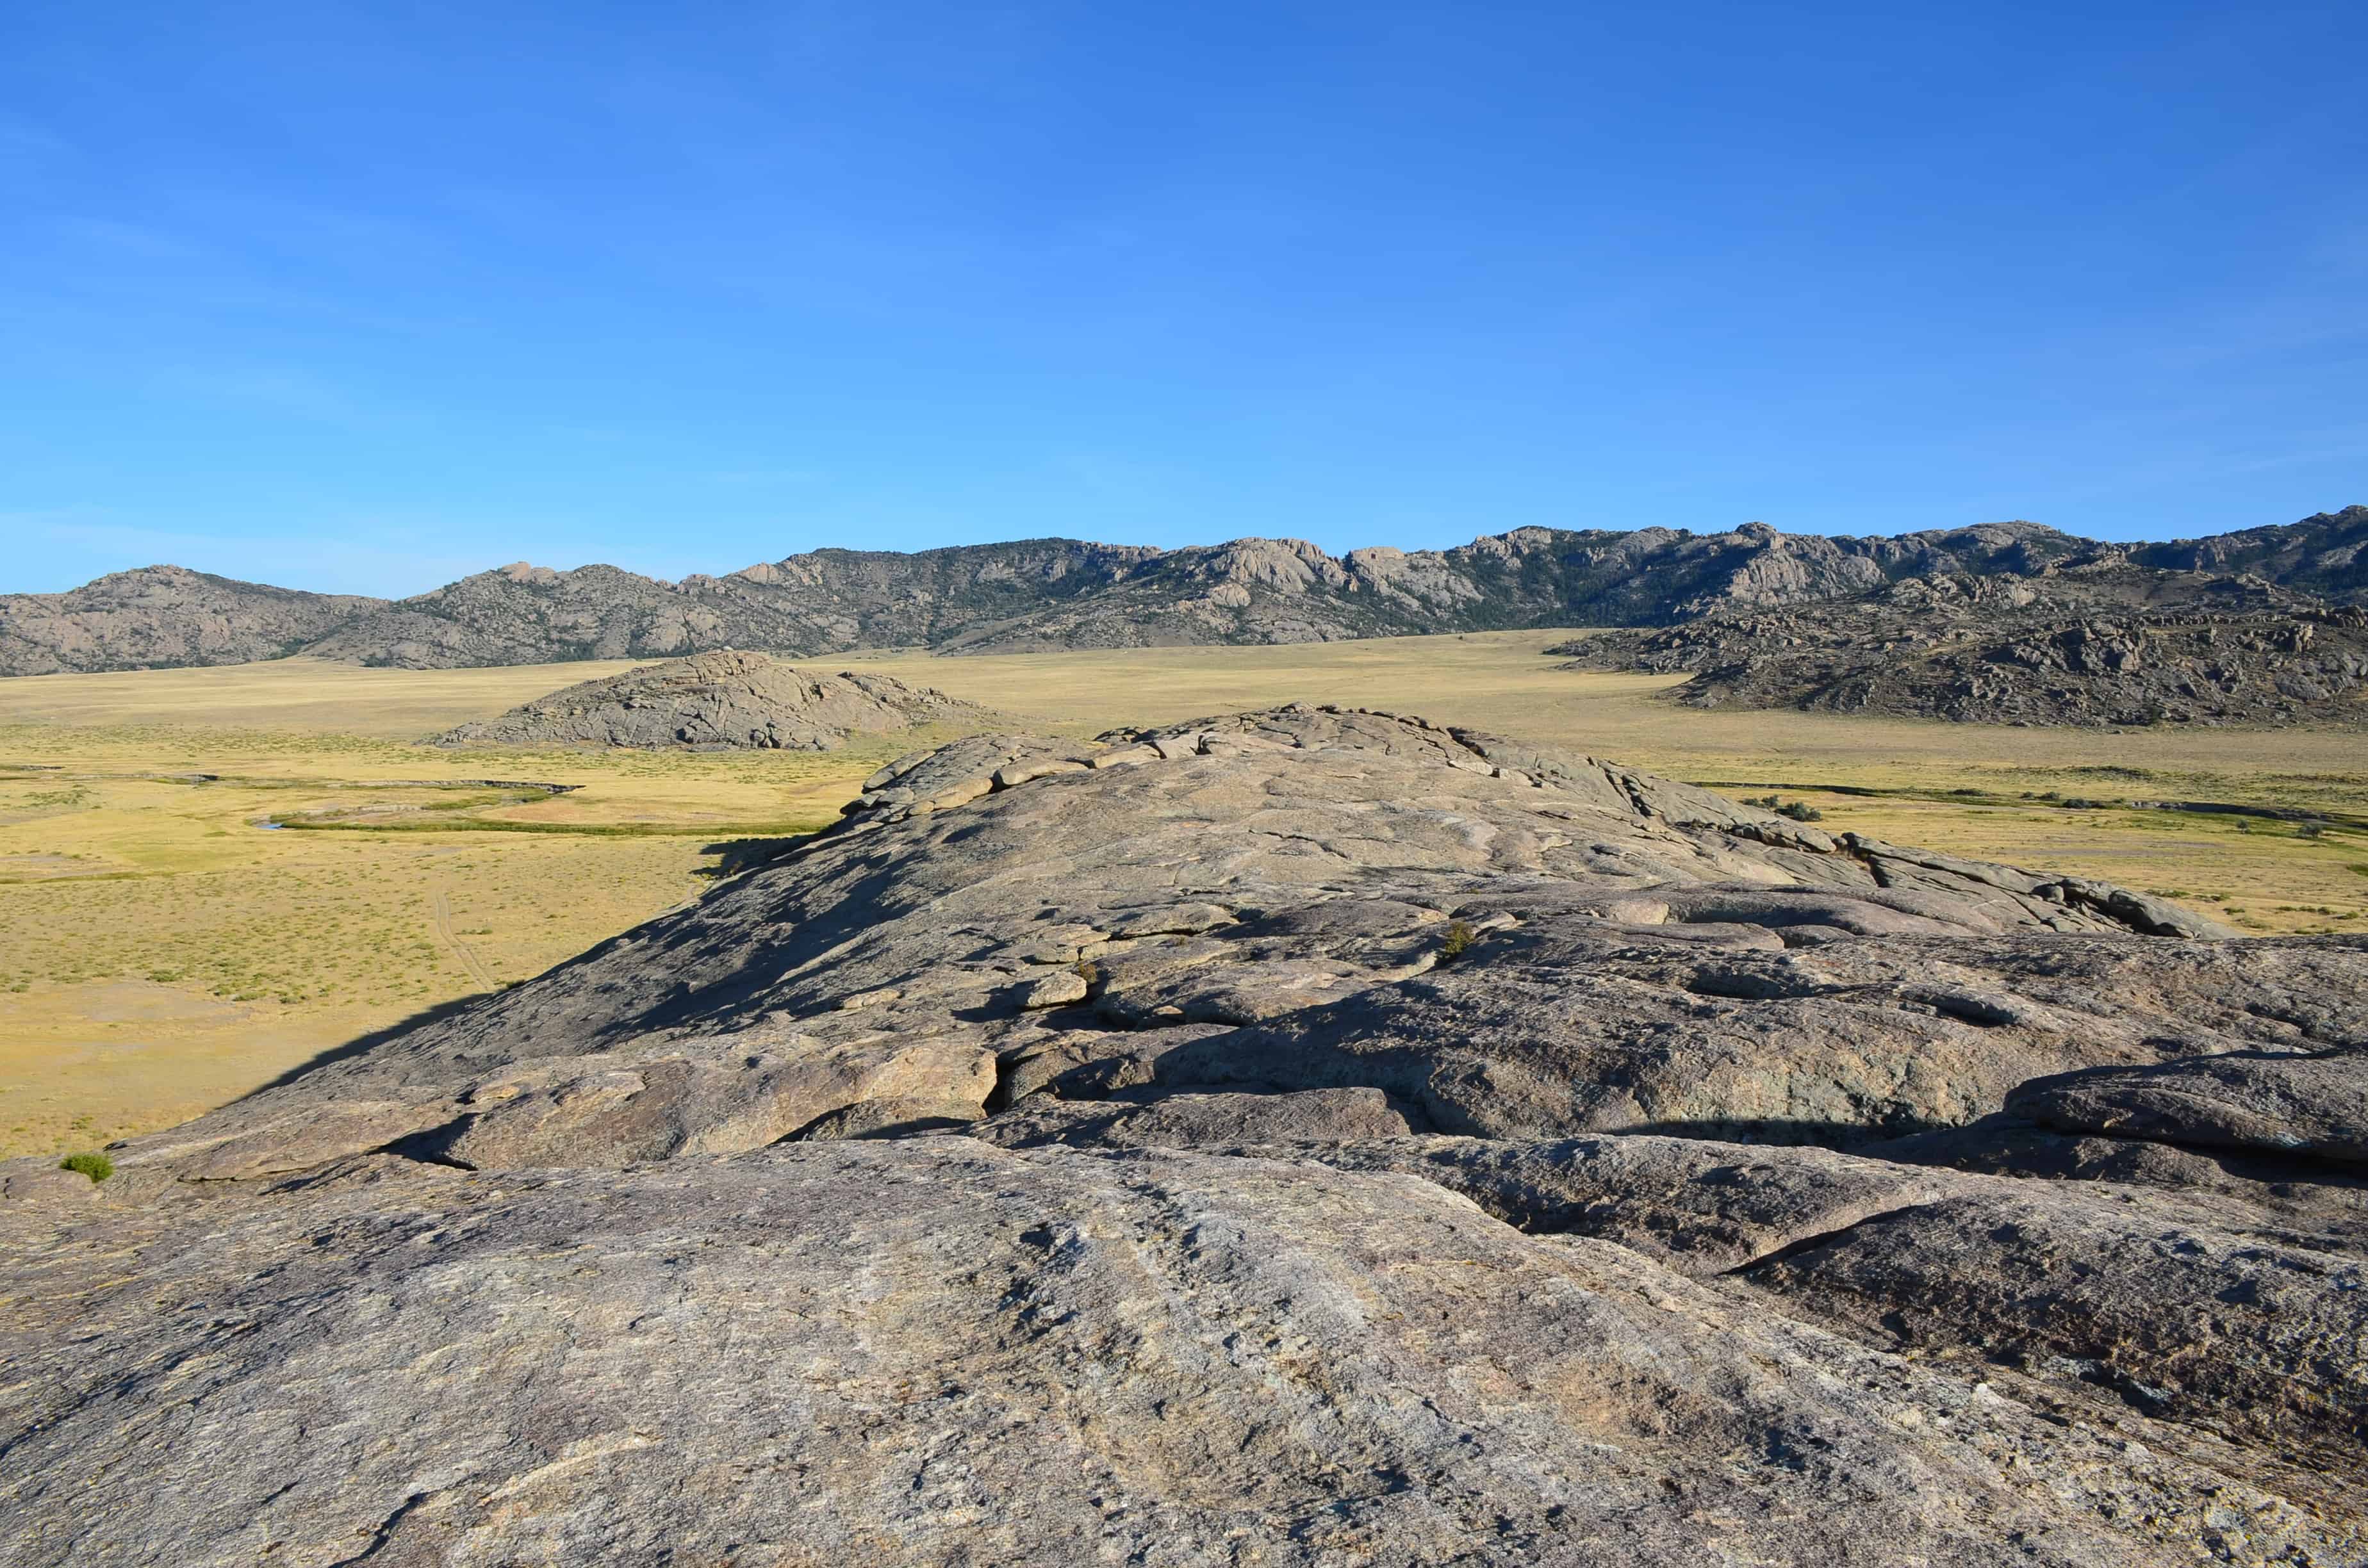 The view from the top of Independence Rock State Historic Site in Wyoming